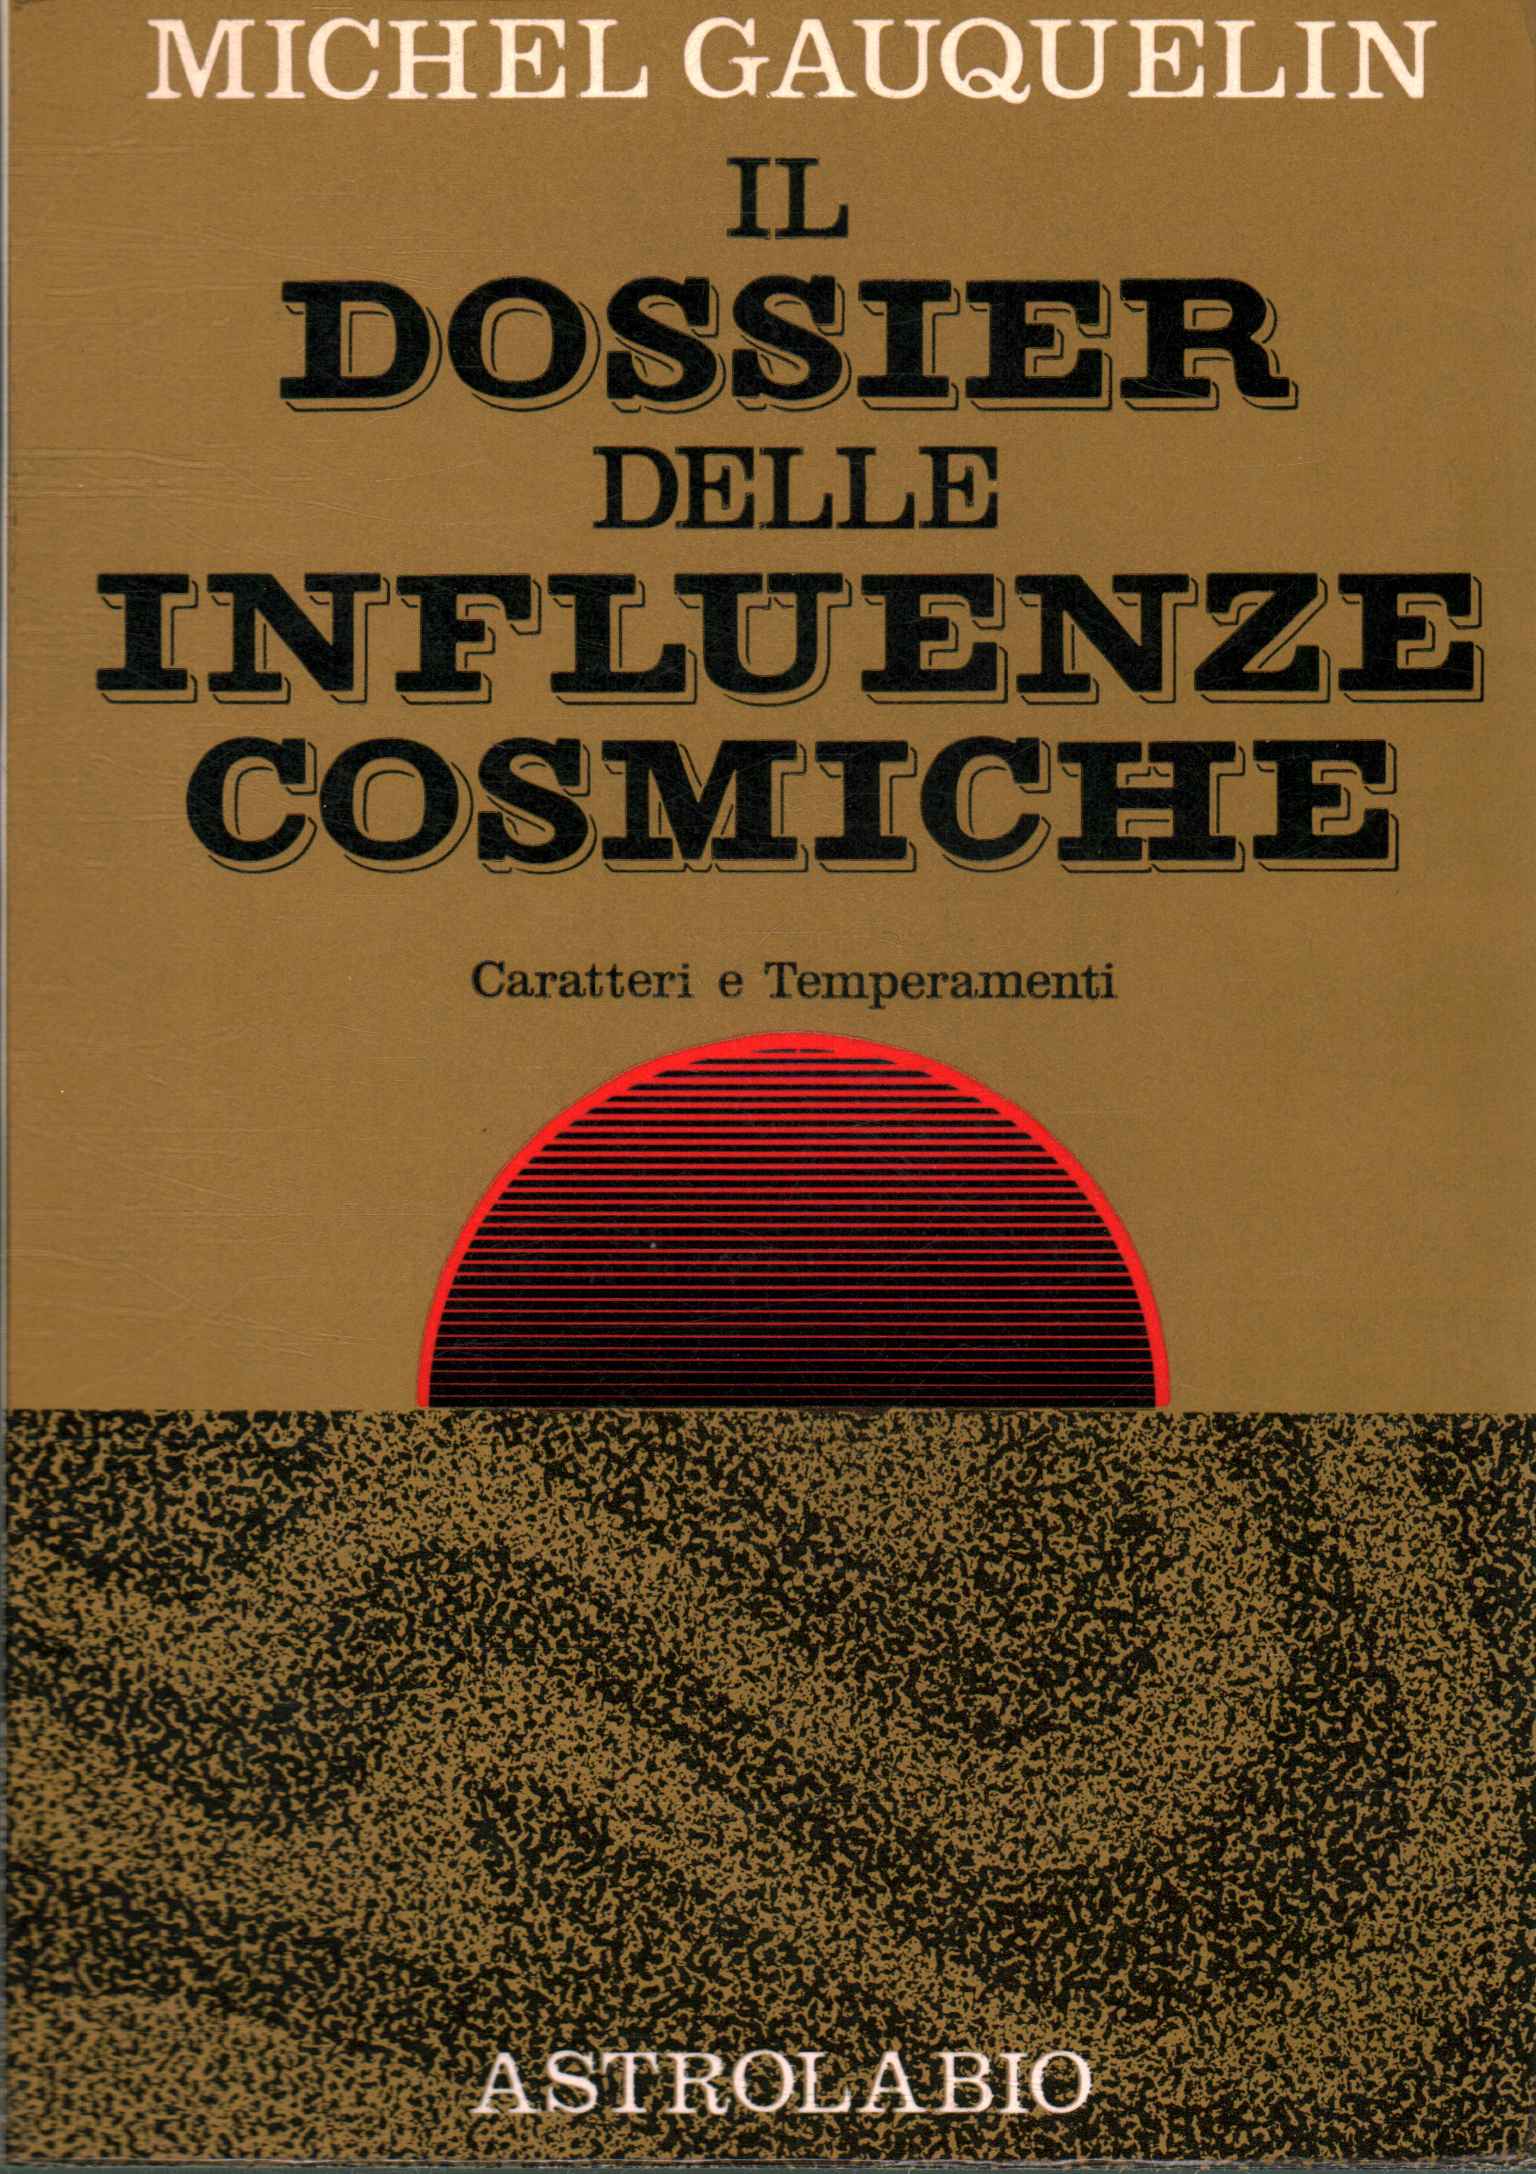 The dossier of cosmic influences